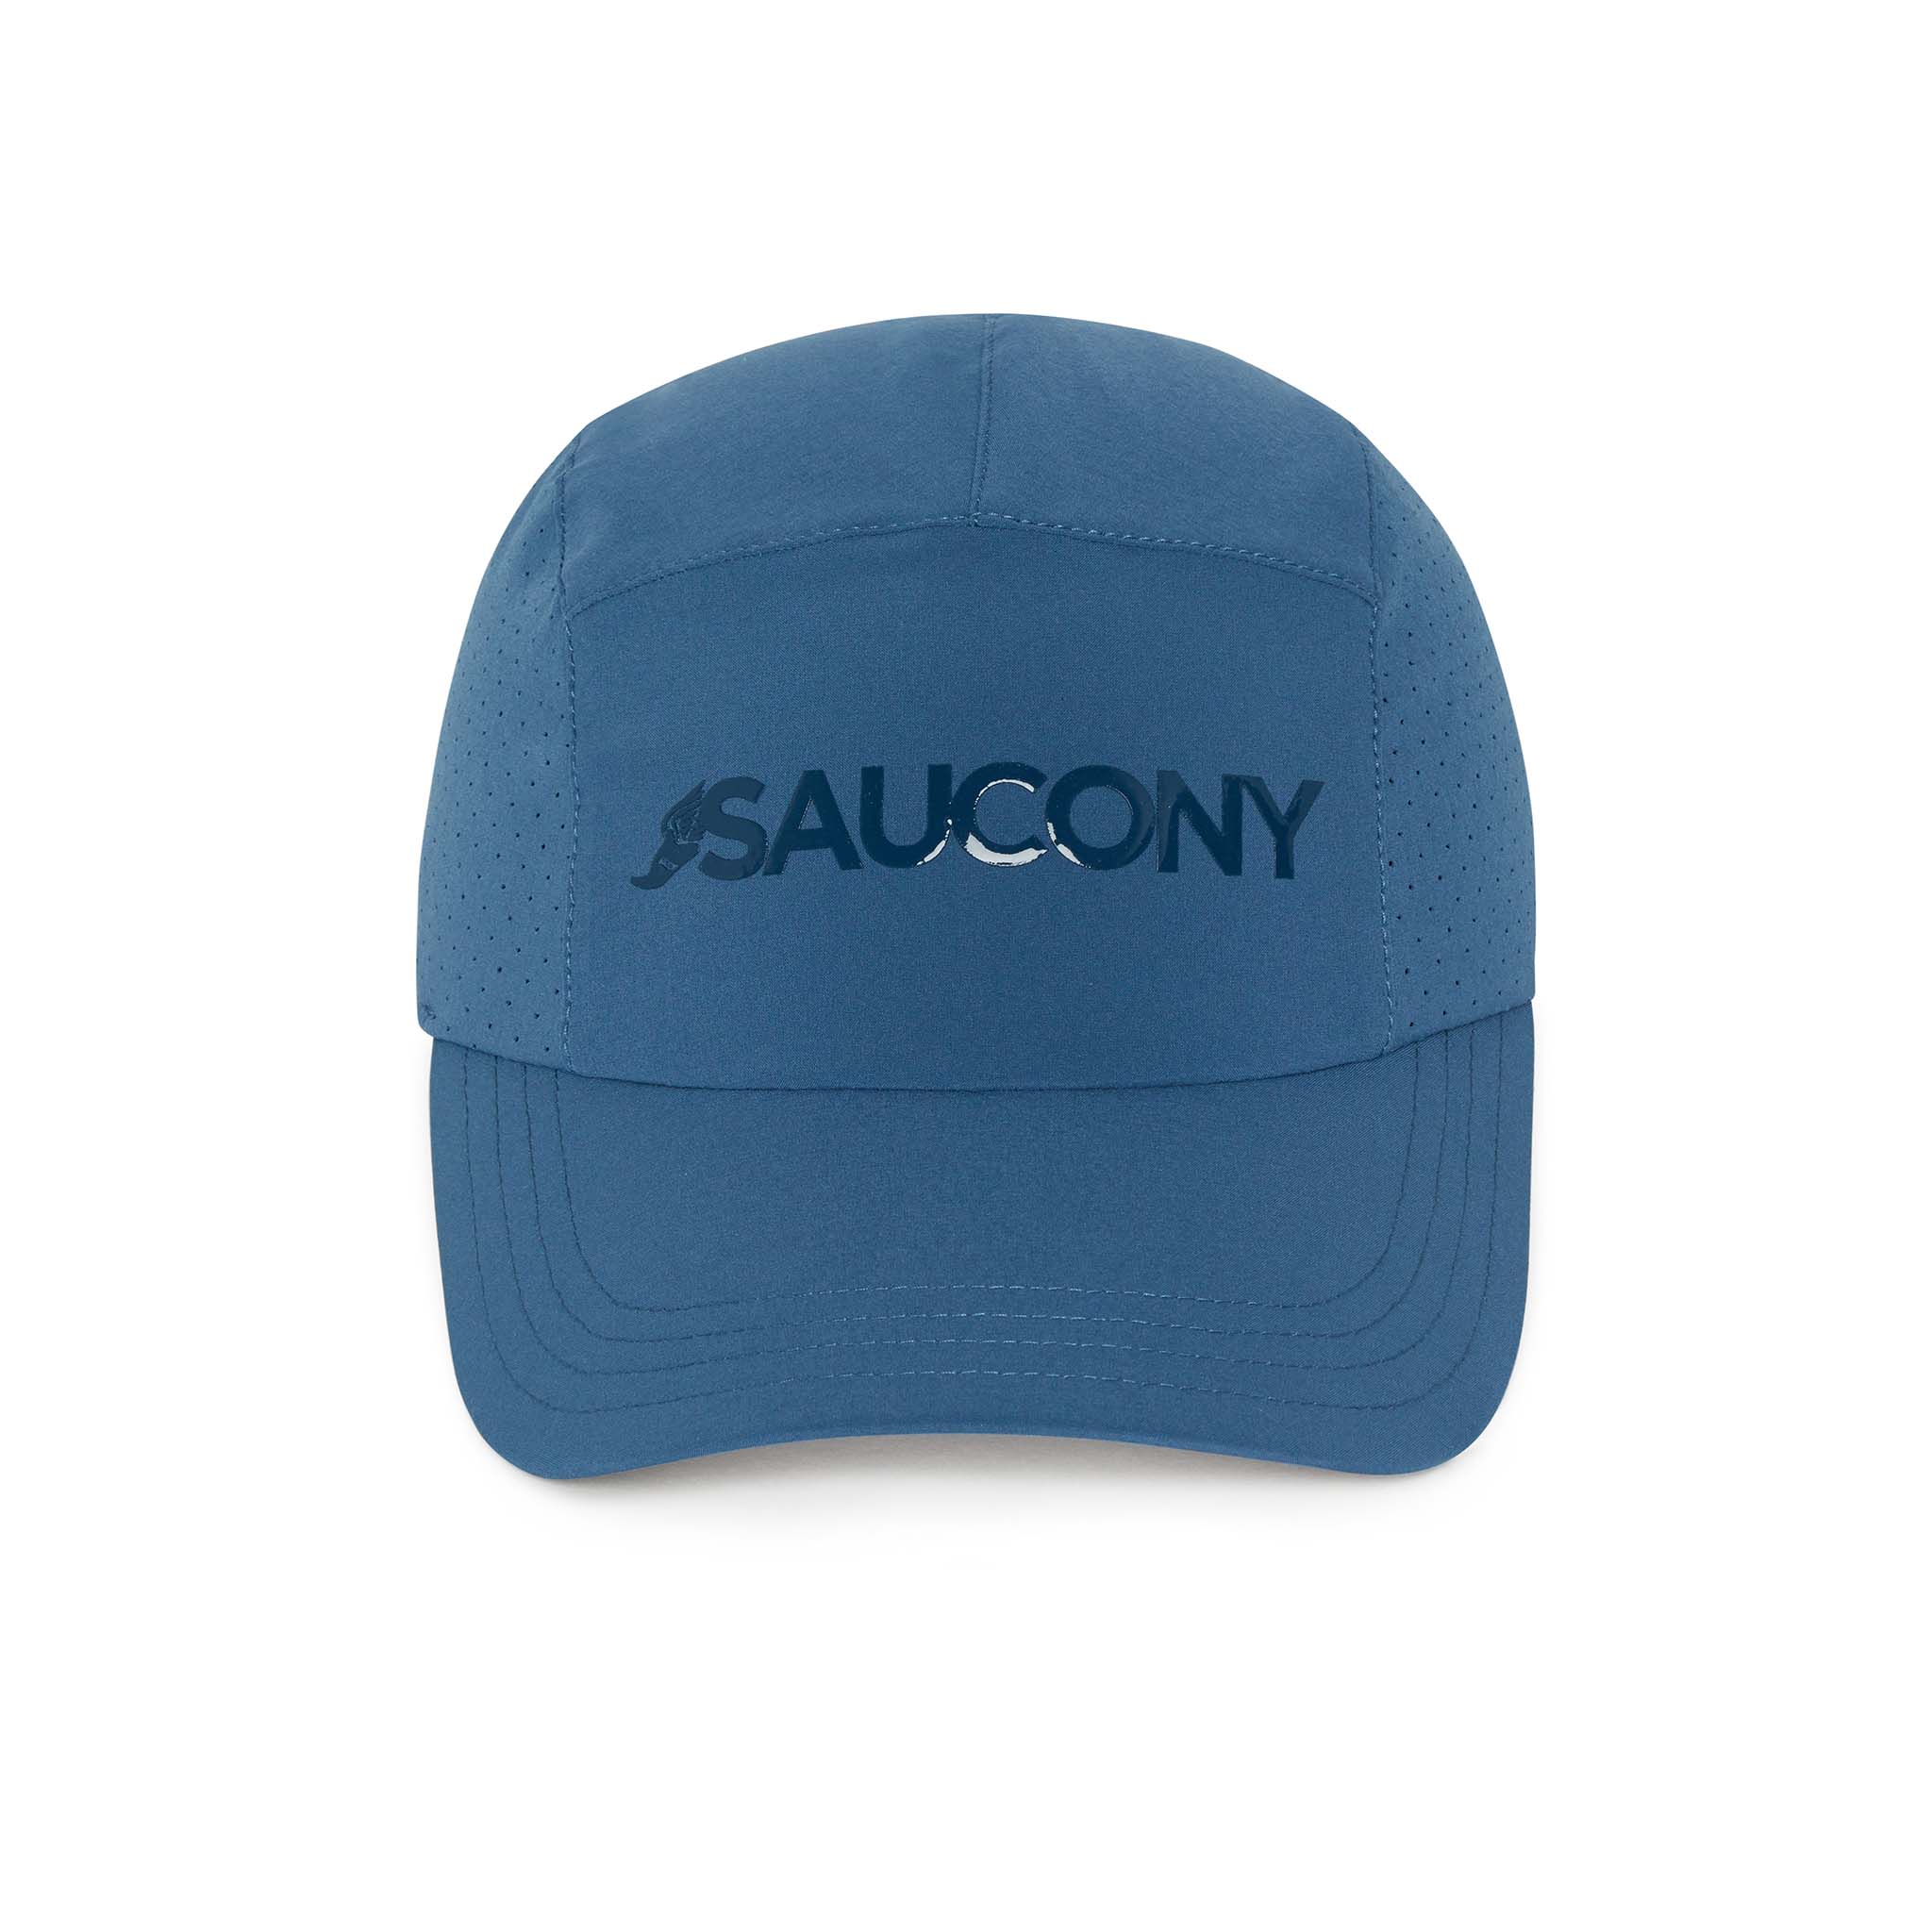 Saucony Outpace Hat running cap   Soccer Sport Fitness